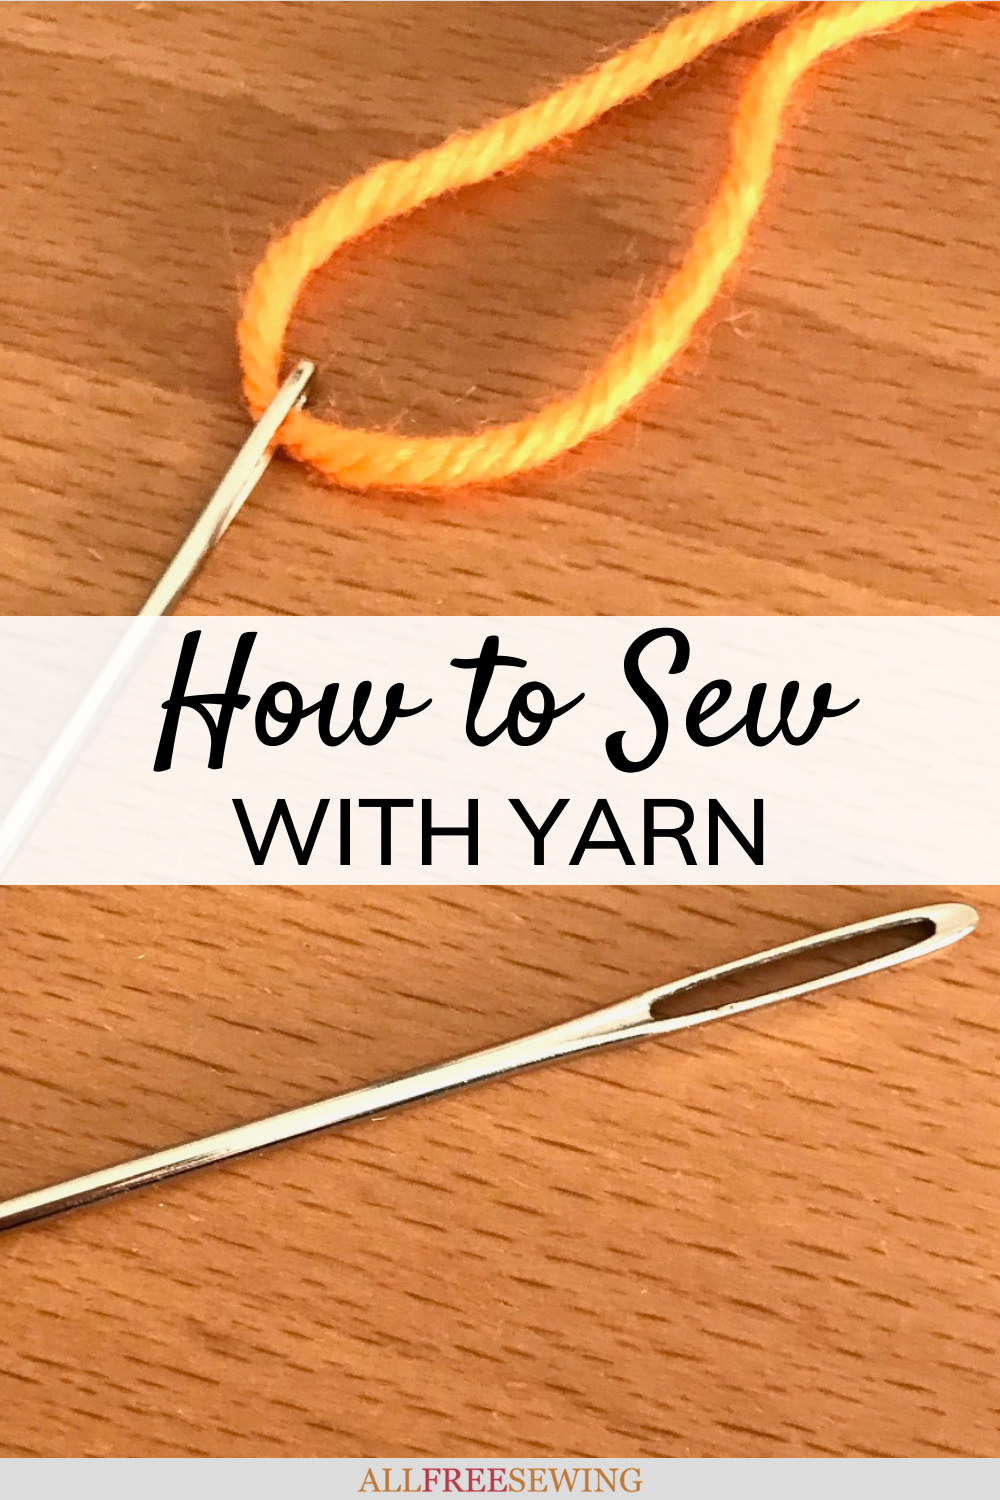 https://irepo.primecp.com/2021/09/504184/How-to-Sew-with-Yarn-pin1_UserCommentImage_ID-4469078.png?v=4469078